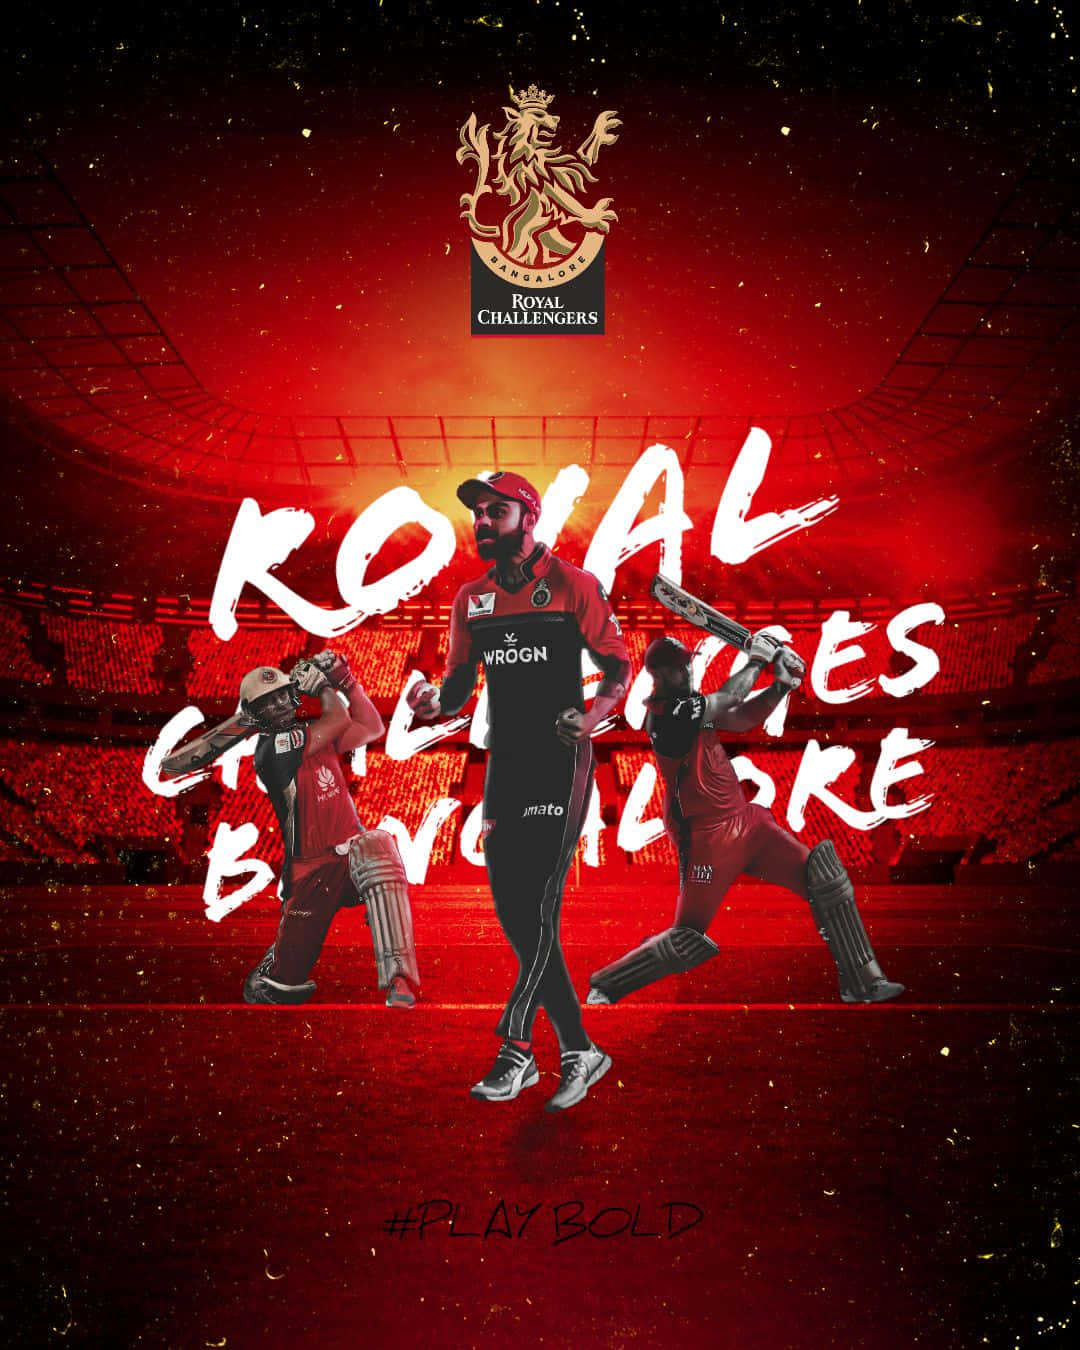 Behind the Scenes of the Royal Challengers Bangalore Team